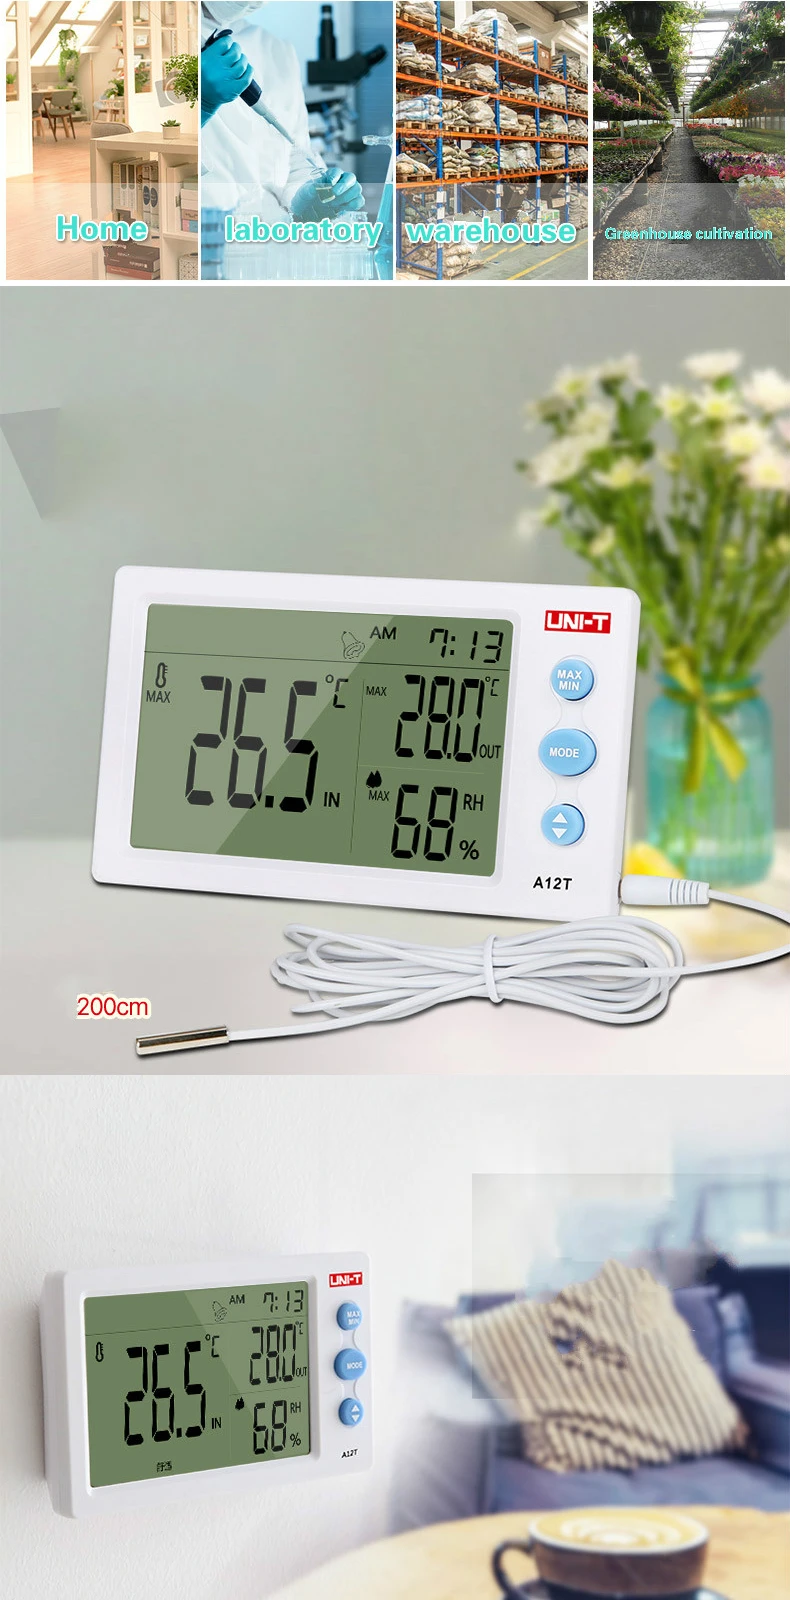 UNI-T A12T Digital LCD Thermometer Hygrometer Temperature Humidity Meter Alarm Clock Weather Station Indoor Outdoor